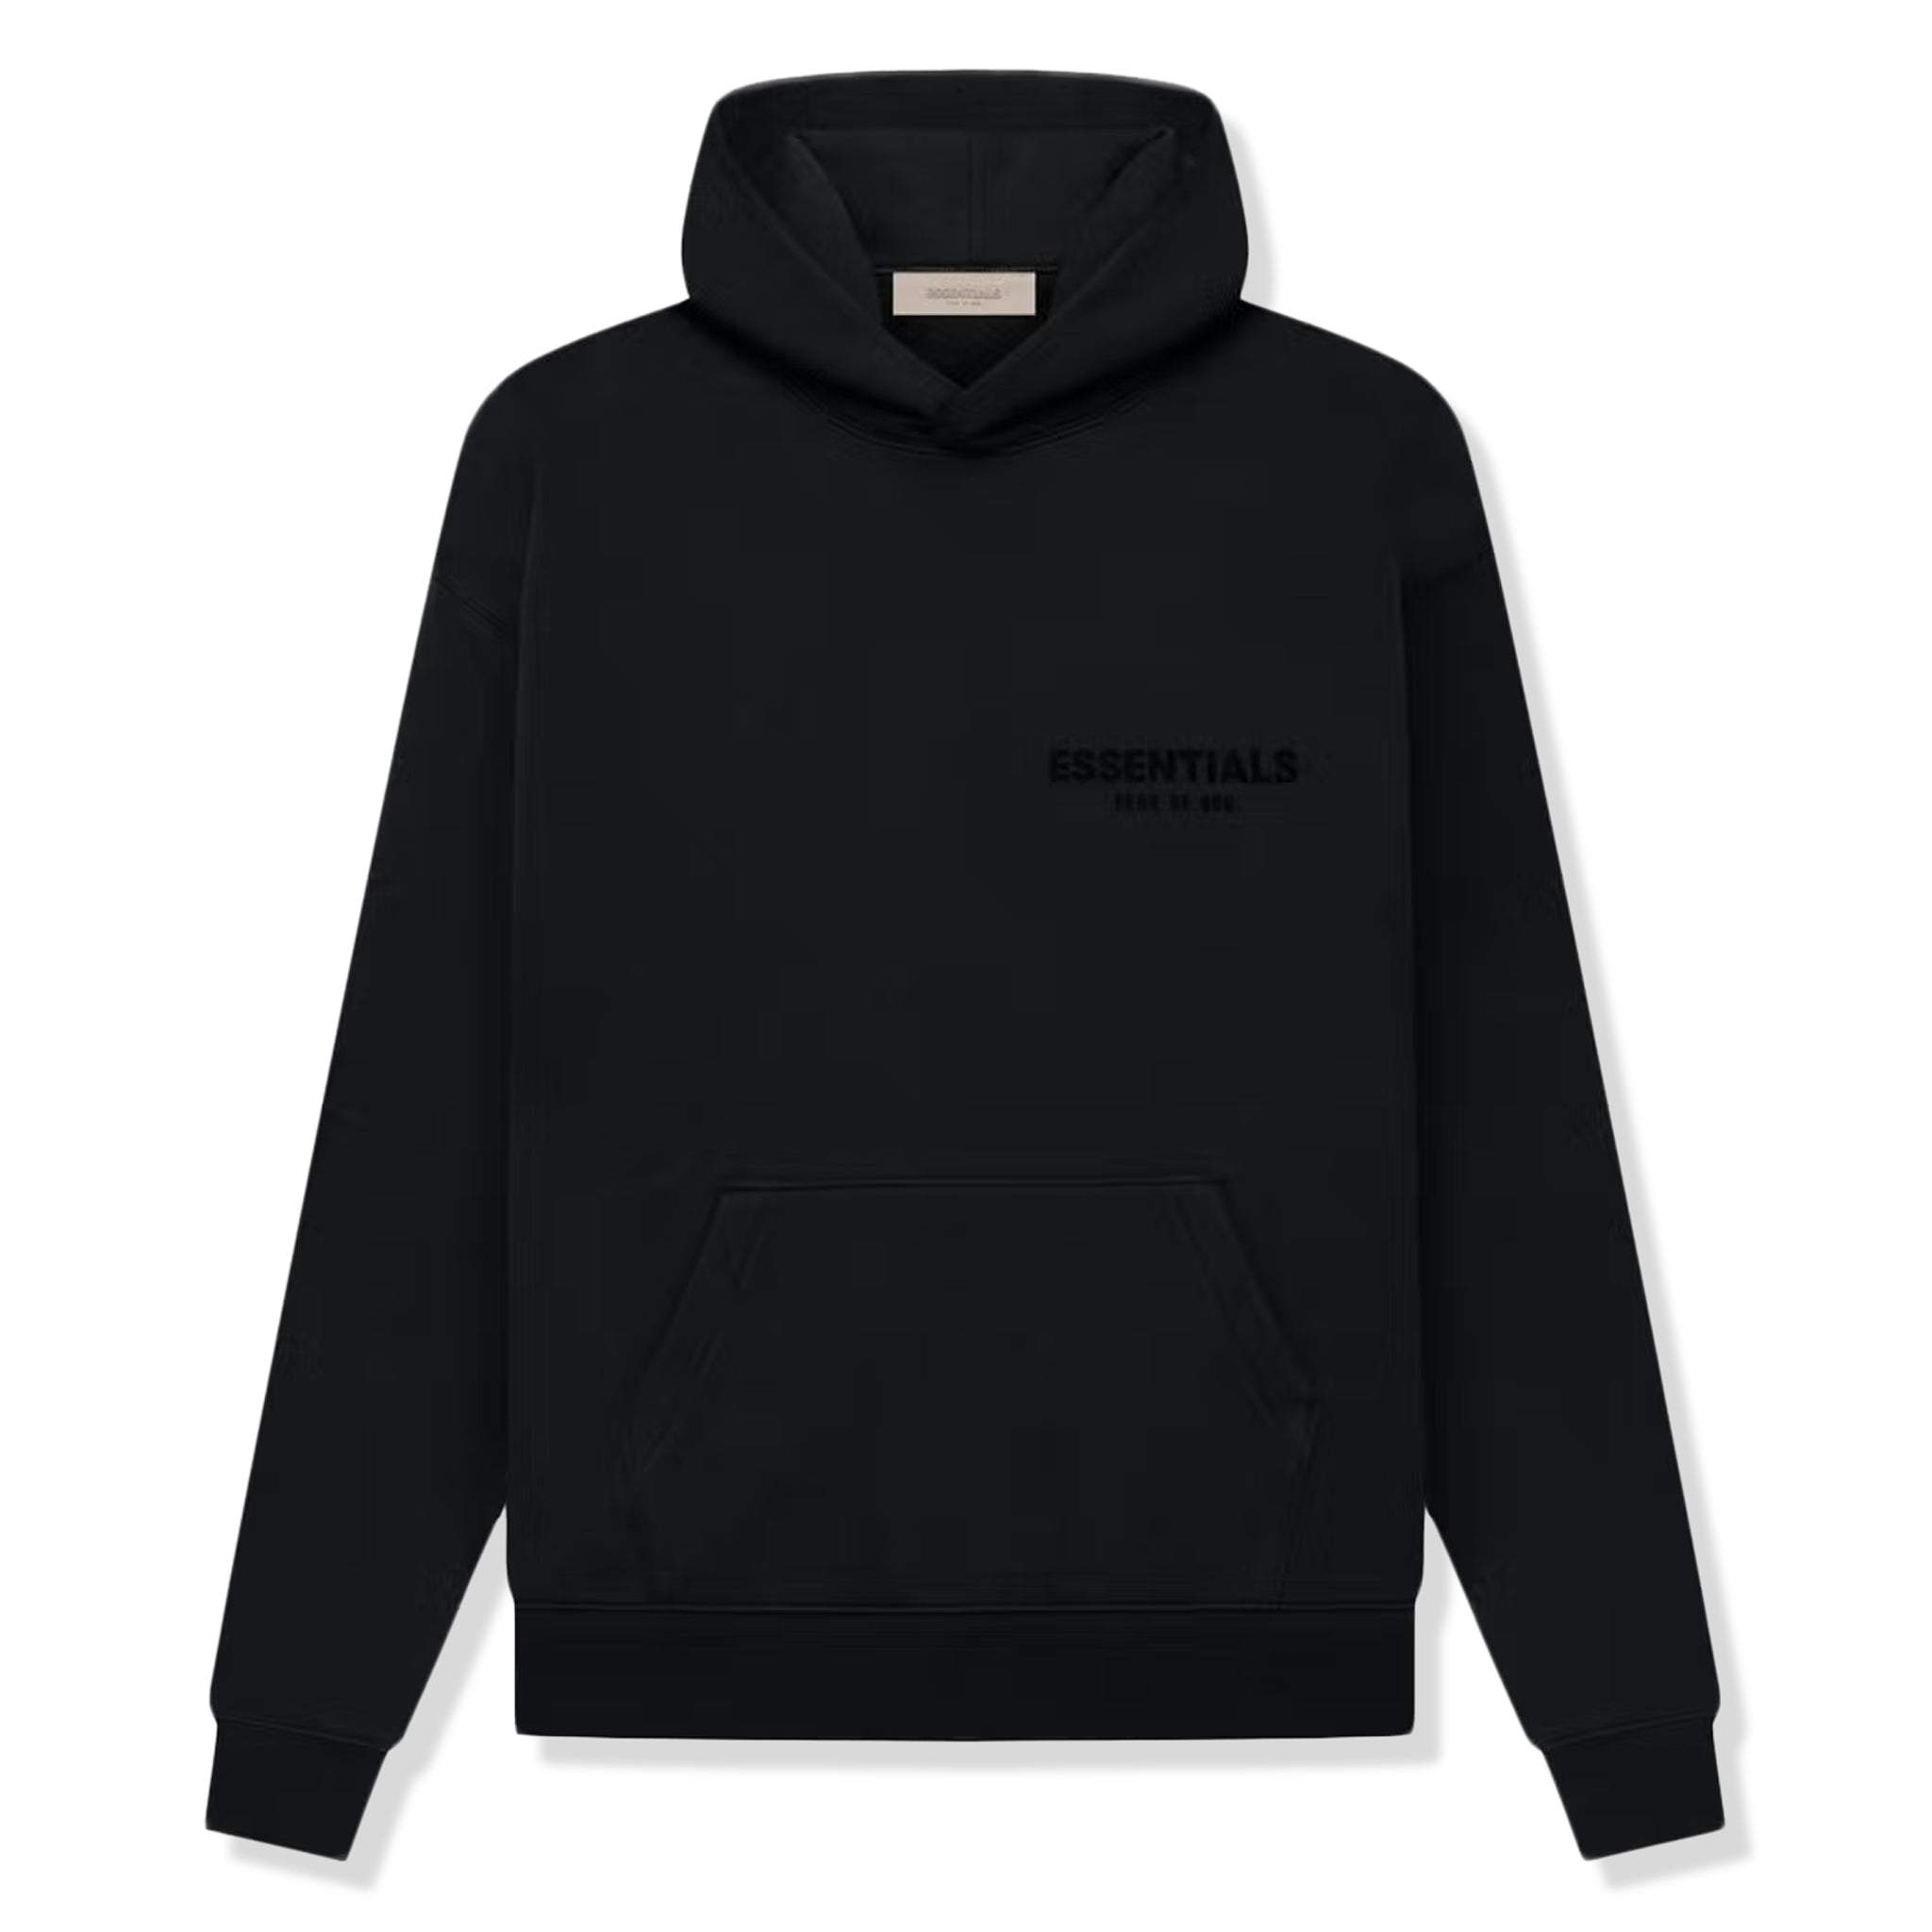 Image of Fear Of God Essentials Black Hoodie (SS22)